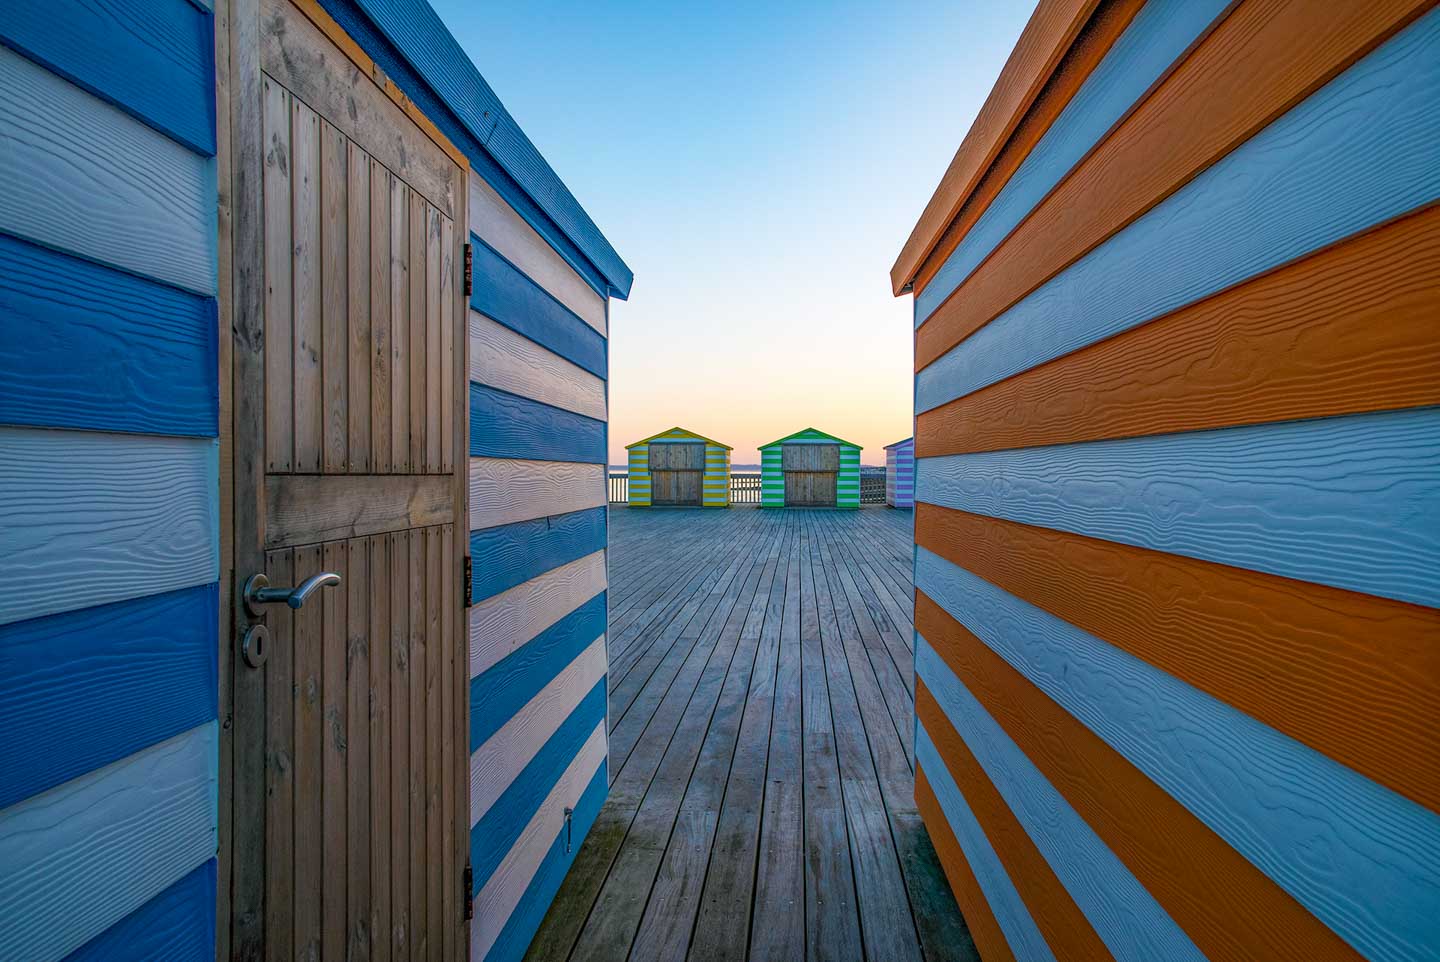 CJPOTY July 2023 shortlisted image for the Summer theme - beach huts